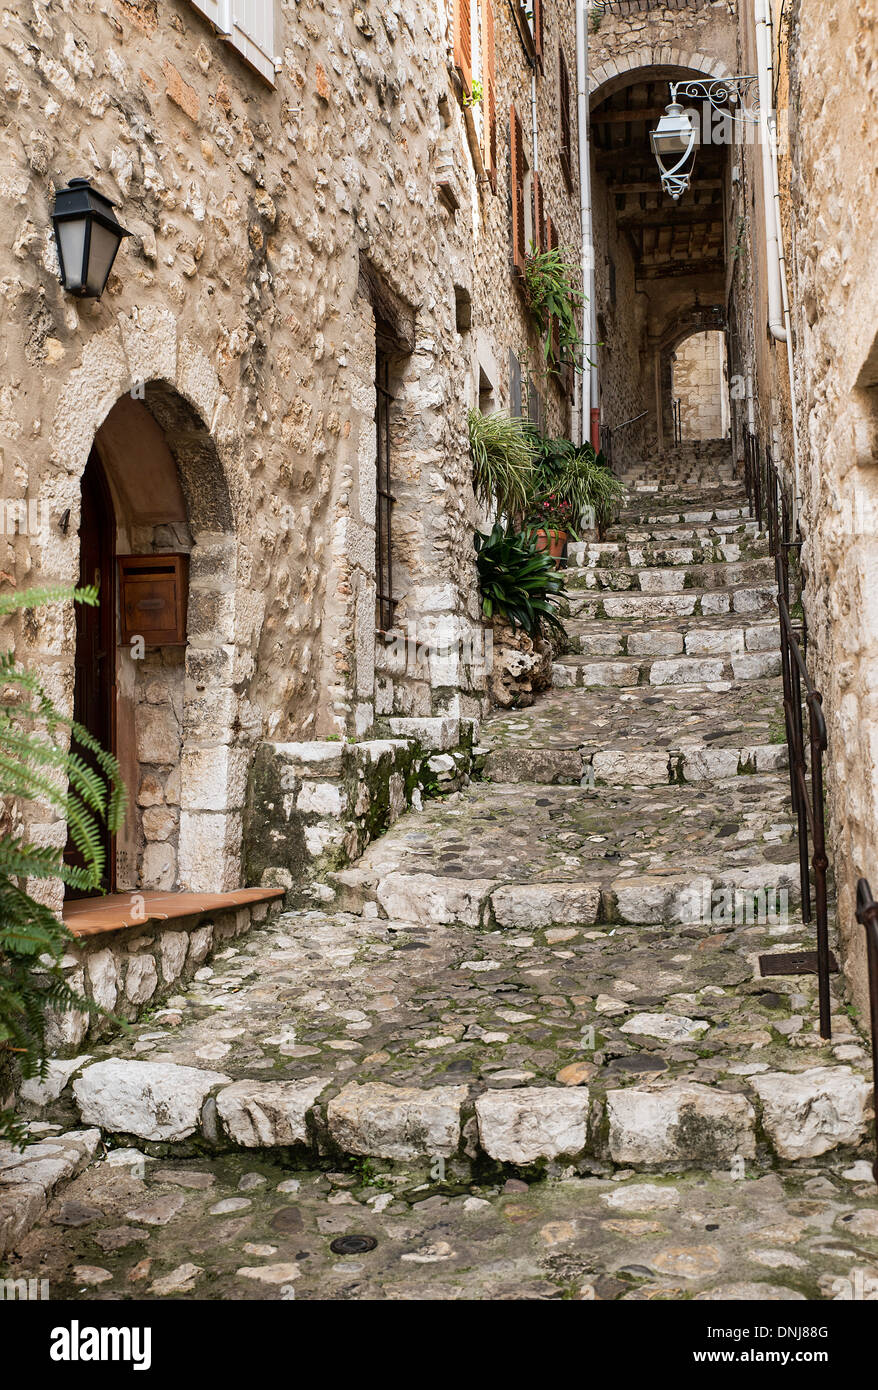 Rustic stone steps lead up the hill in the medieval village of St Paul de Vence, Provance, France Stock Photo